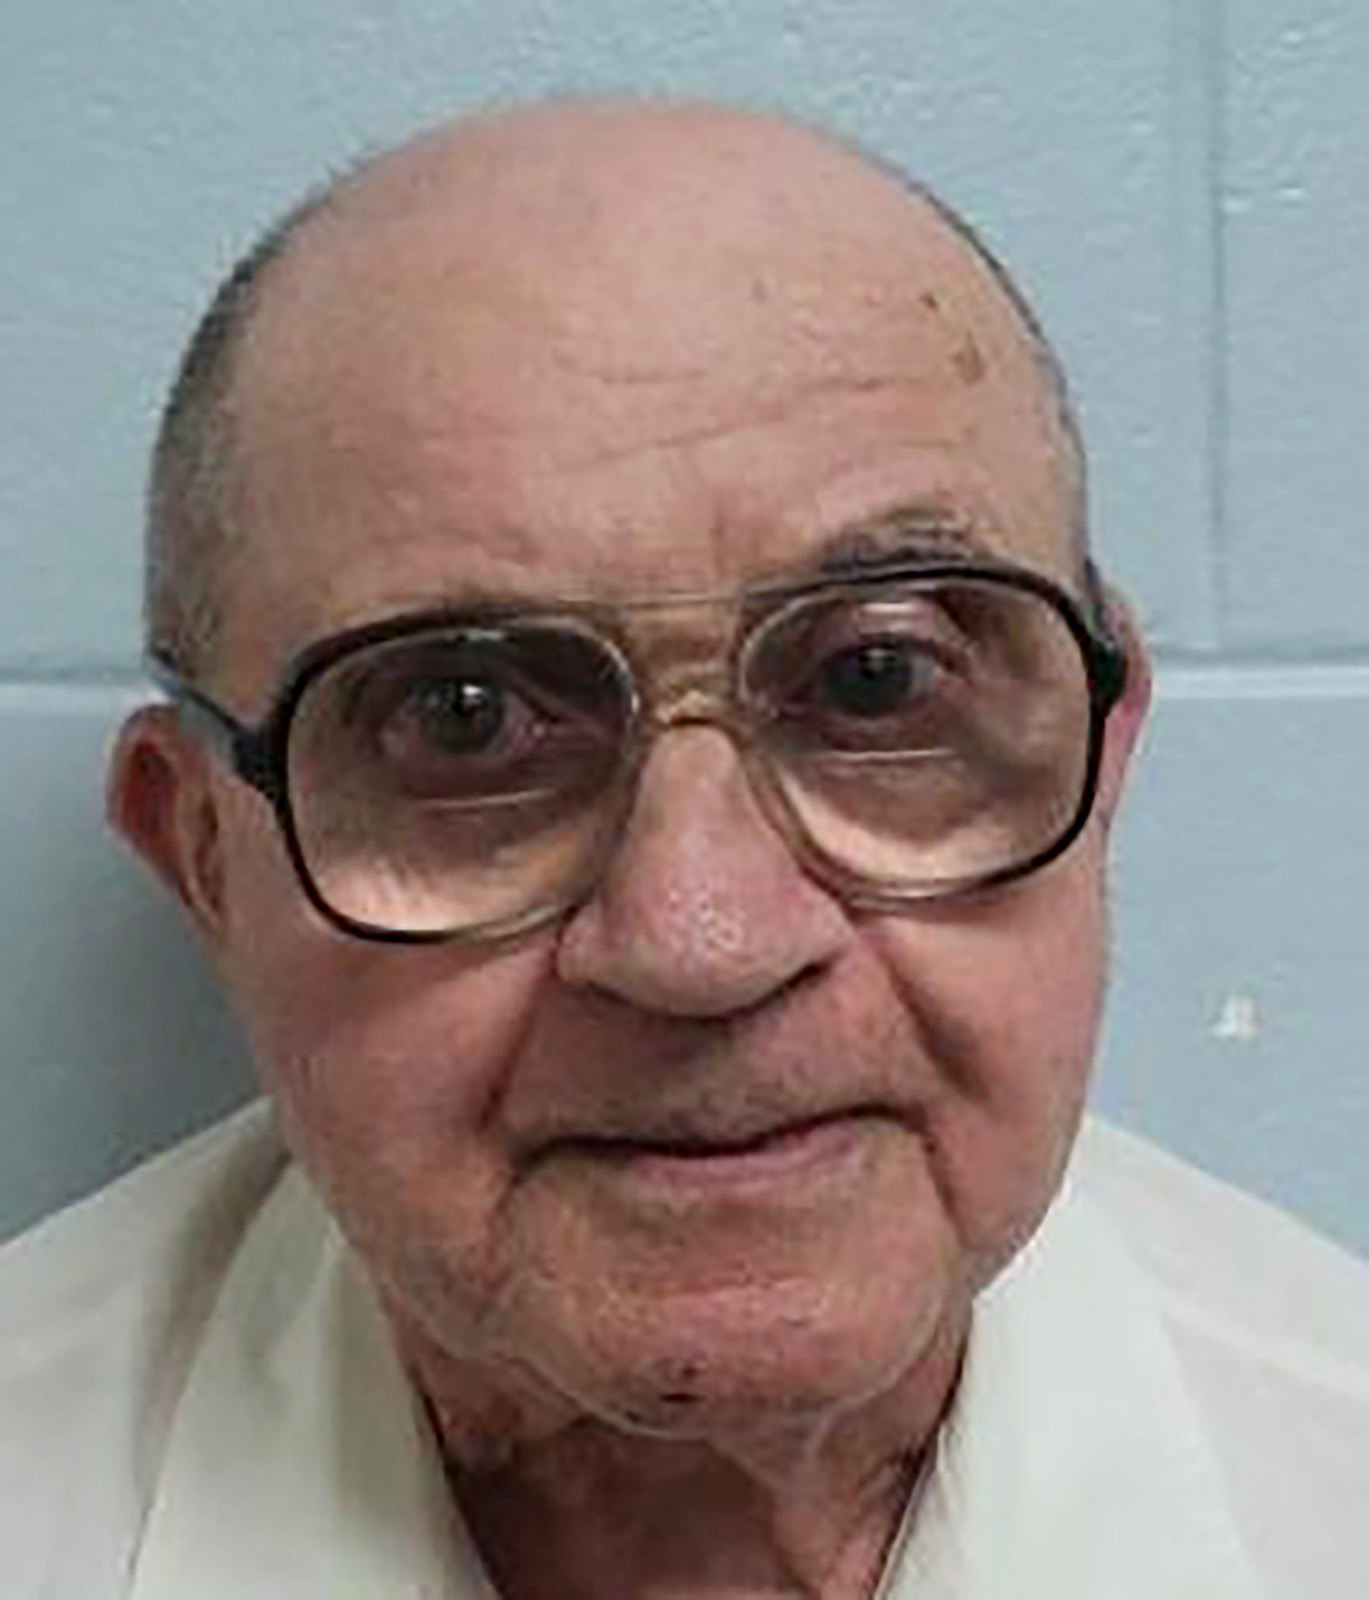 Thomas Edwin Blanton Jr., a one-time Ku Klux Klansman convicted in the 1963 church bombing that killed four black girls in Birmingham, Ala. Alabama's parole board is scheduled to consider Blanton for early release during a meeting on Aug. 3.